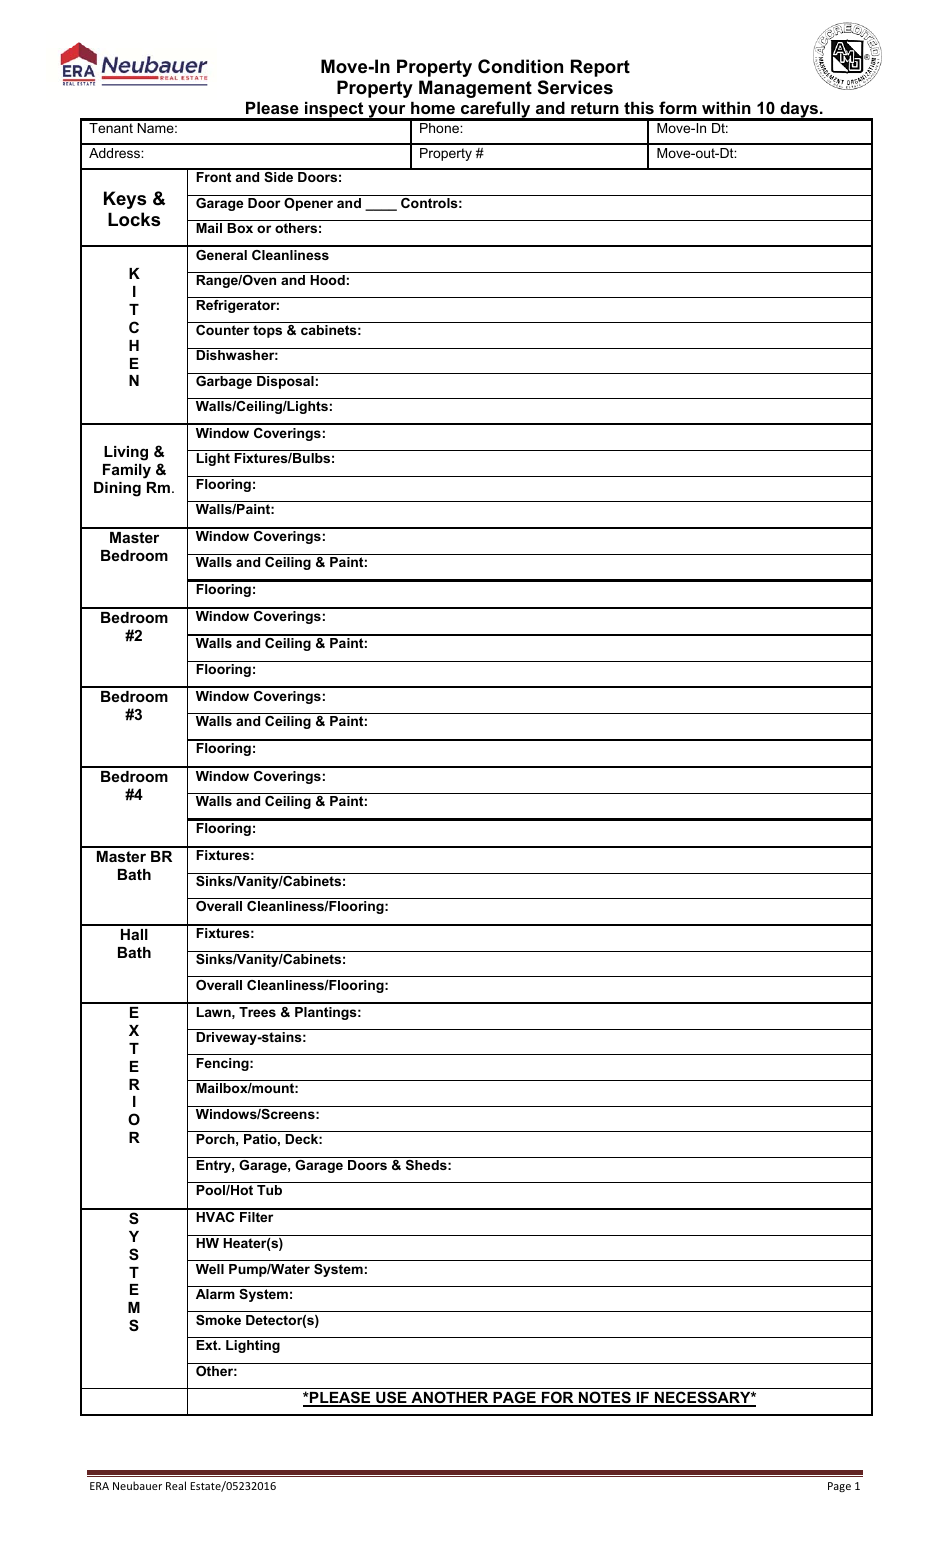 Move-In Property Condition Report Template - Neubauer, Page 1